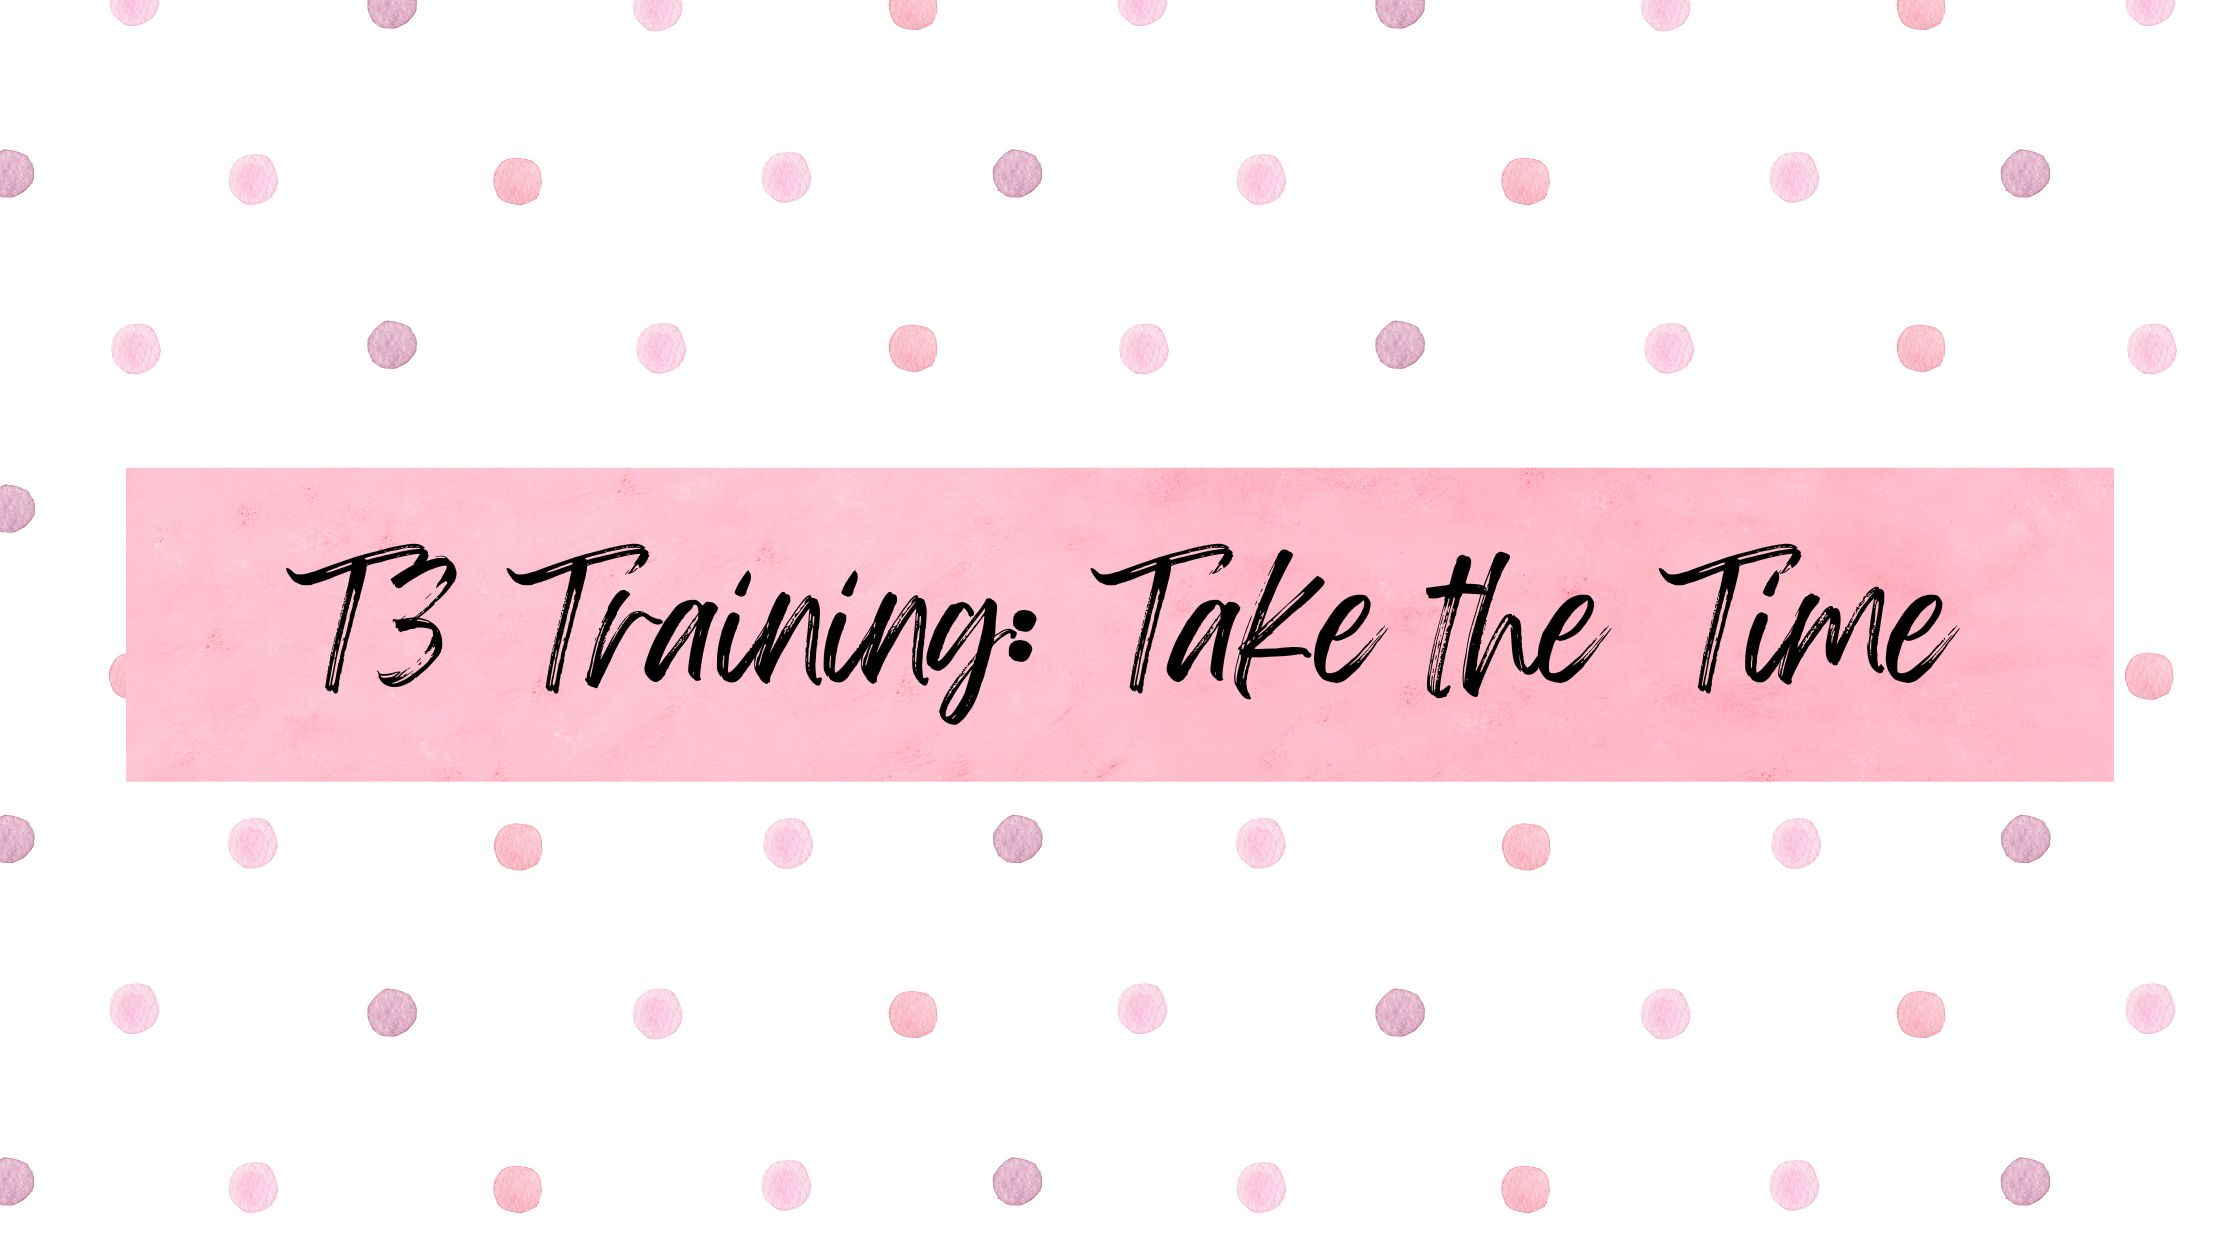 T3 Training: Take the Time